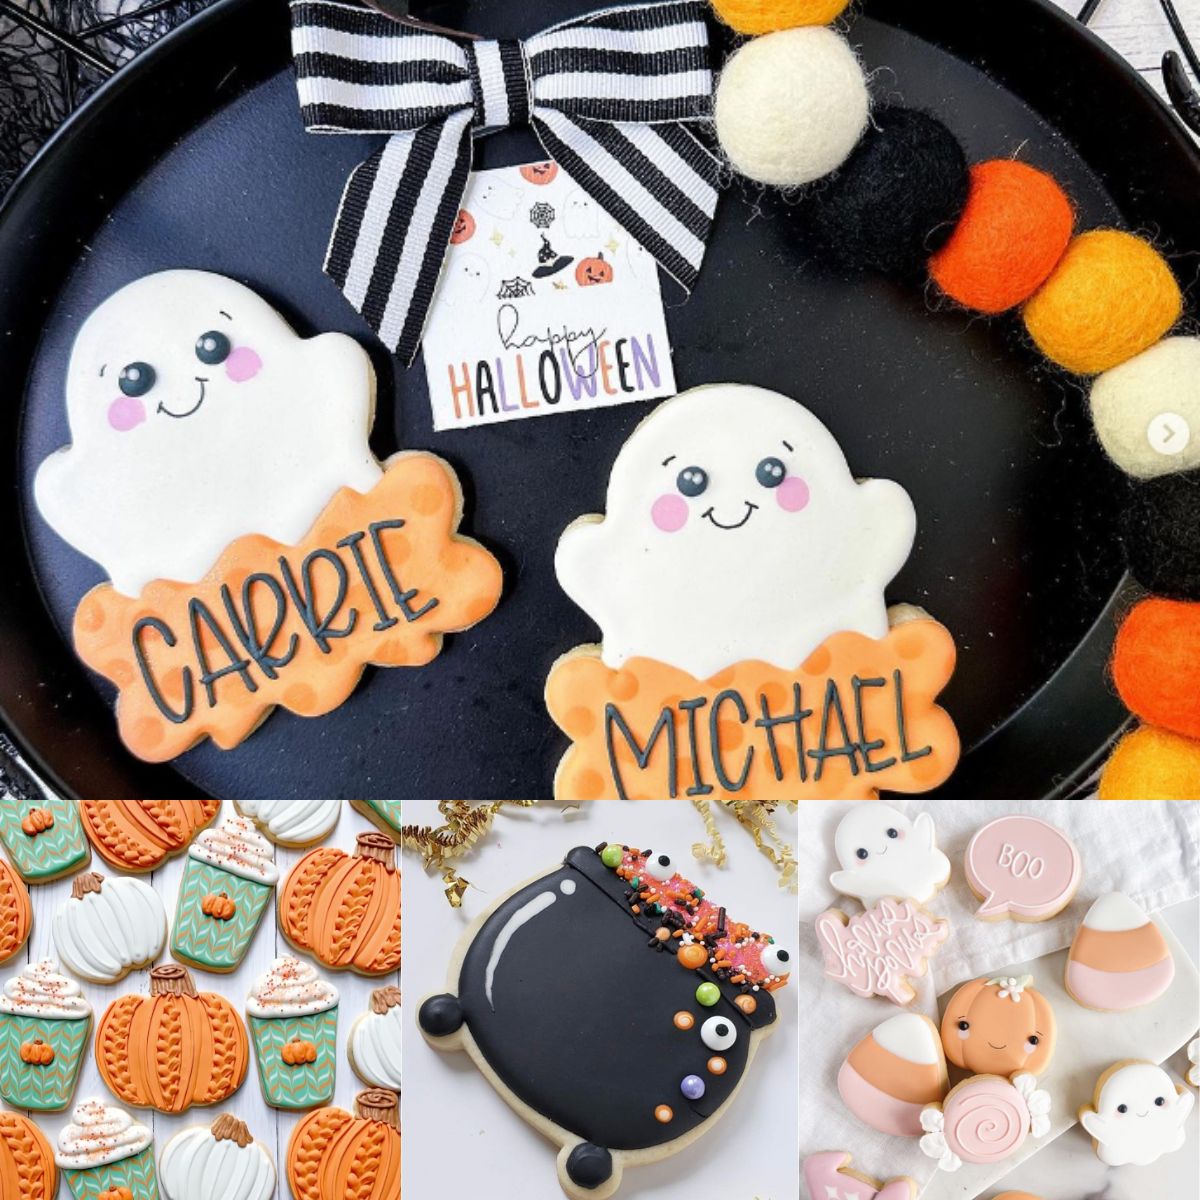 A photo collage shows several adorable designs for sugar cookies decorated for Halloween.